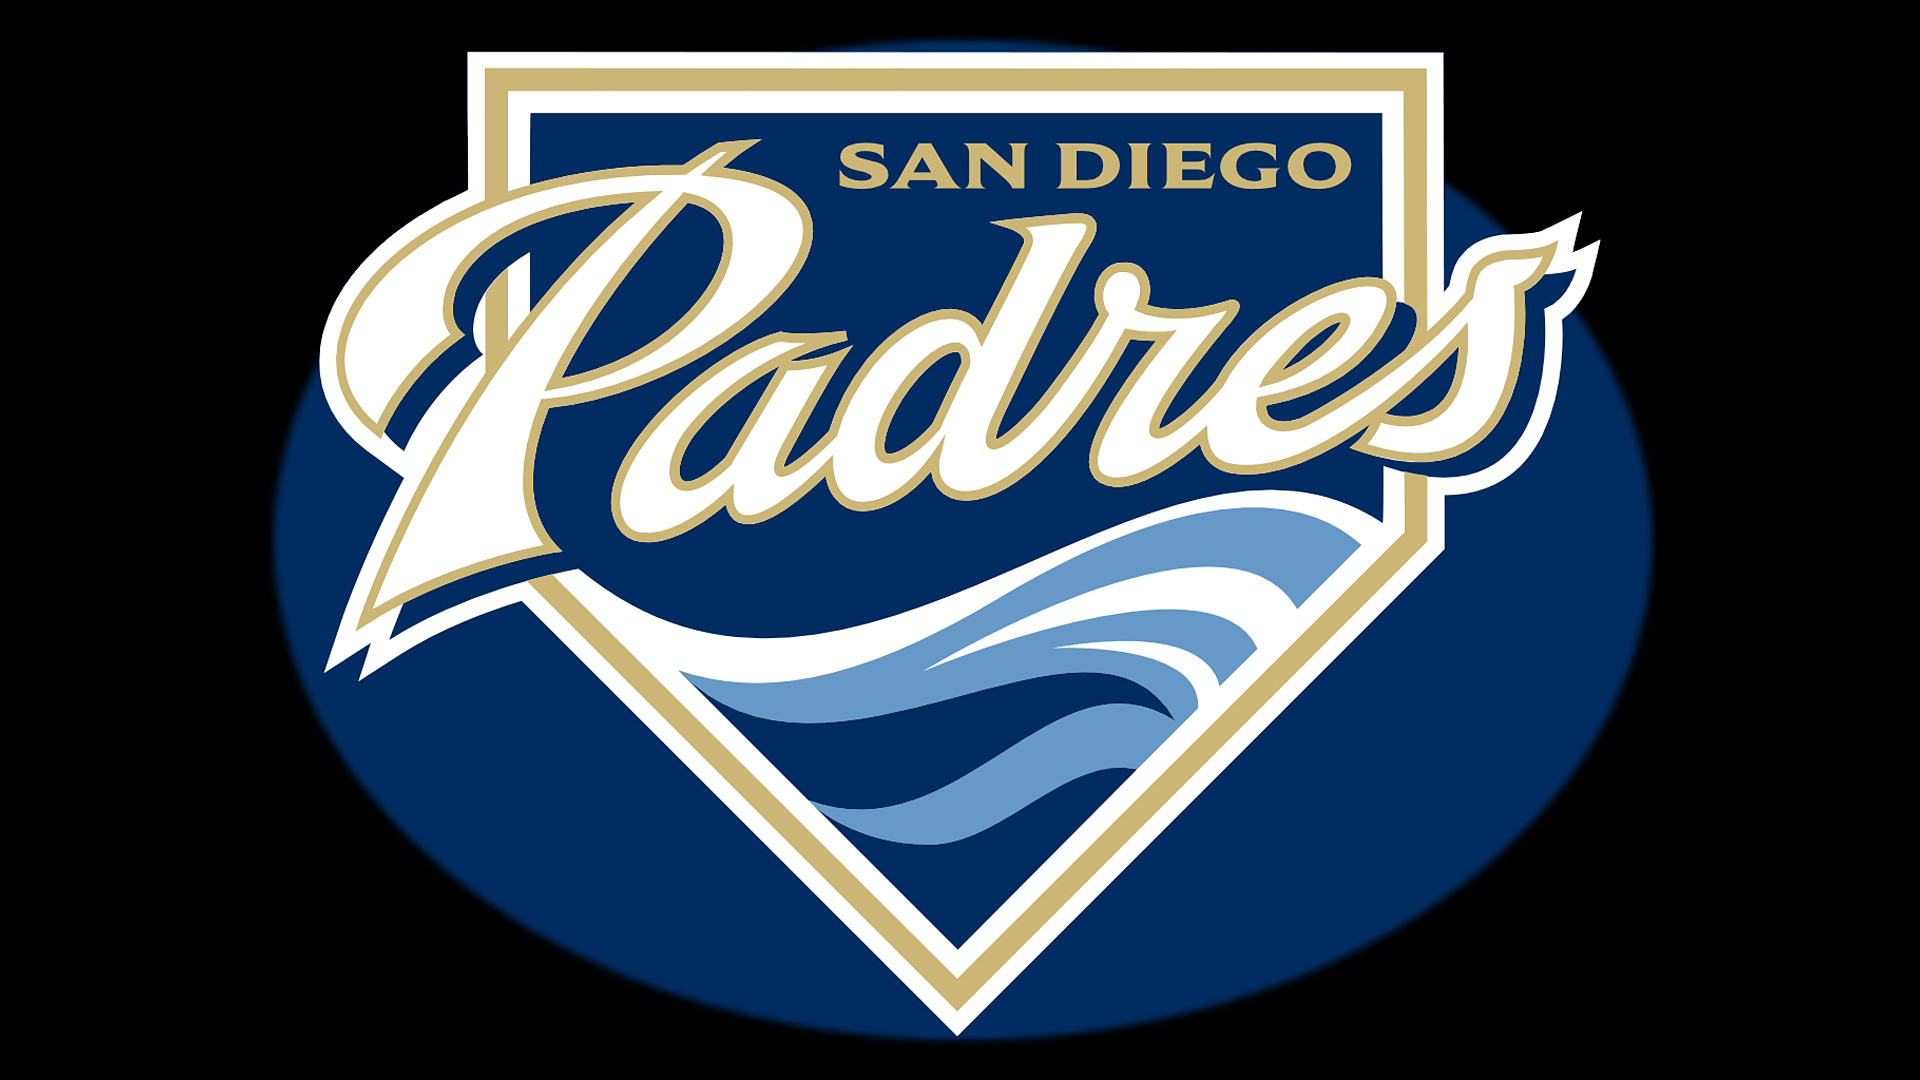 Here are some new wallpapers for you 📱 - San Diego Padres